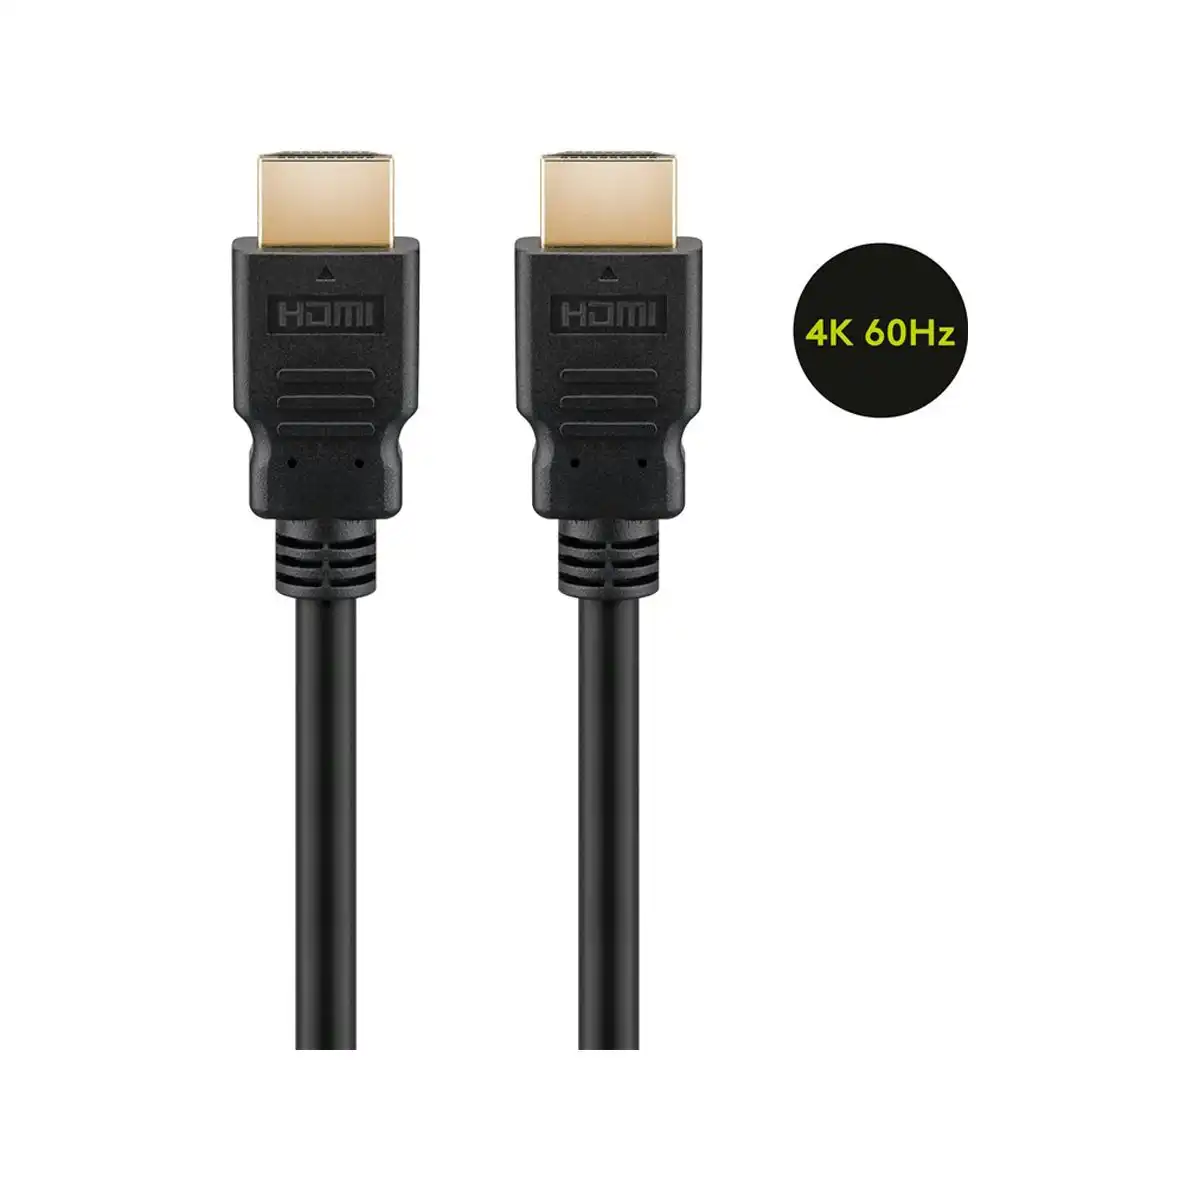 Goobay Series 2.0 HDMI Male > Male Cable with Ethernet 0.5M for PlayStation or Xbox - Black